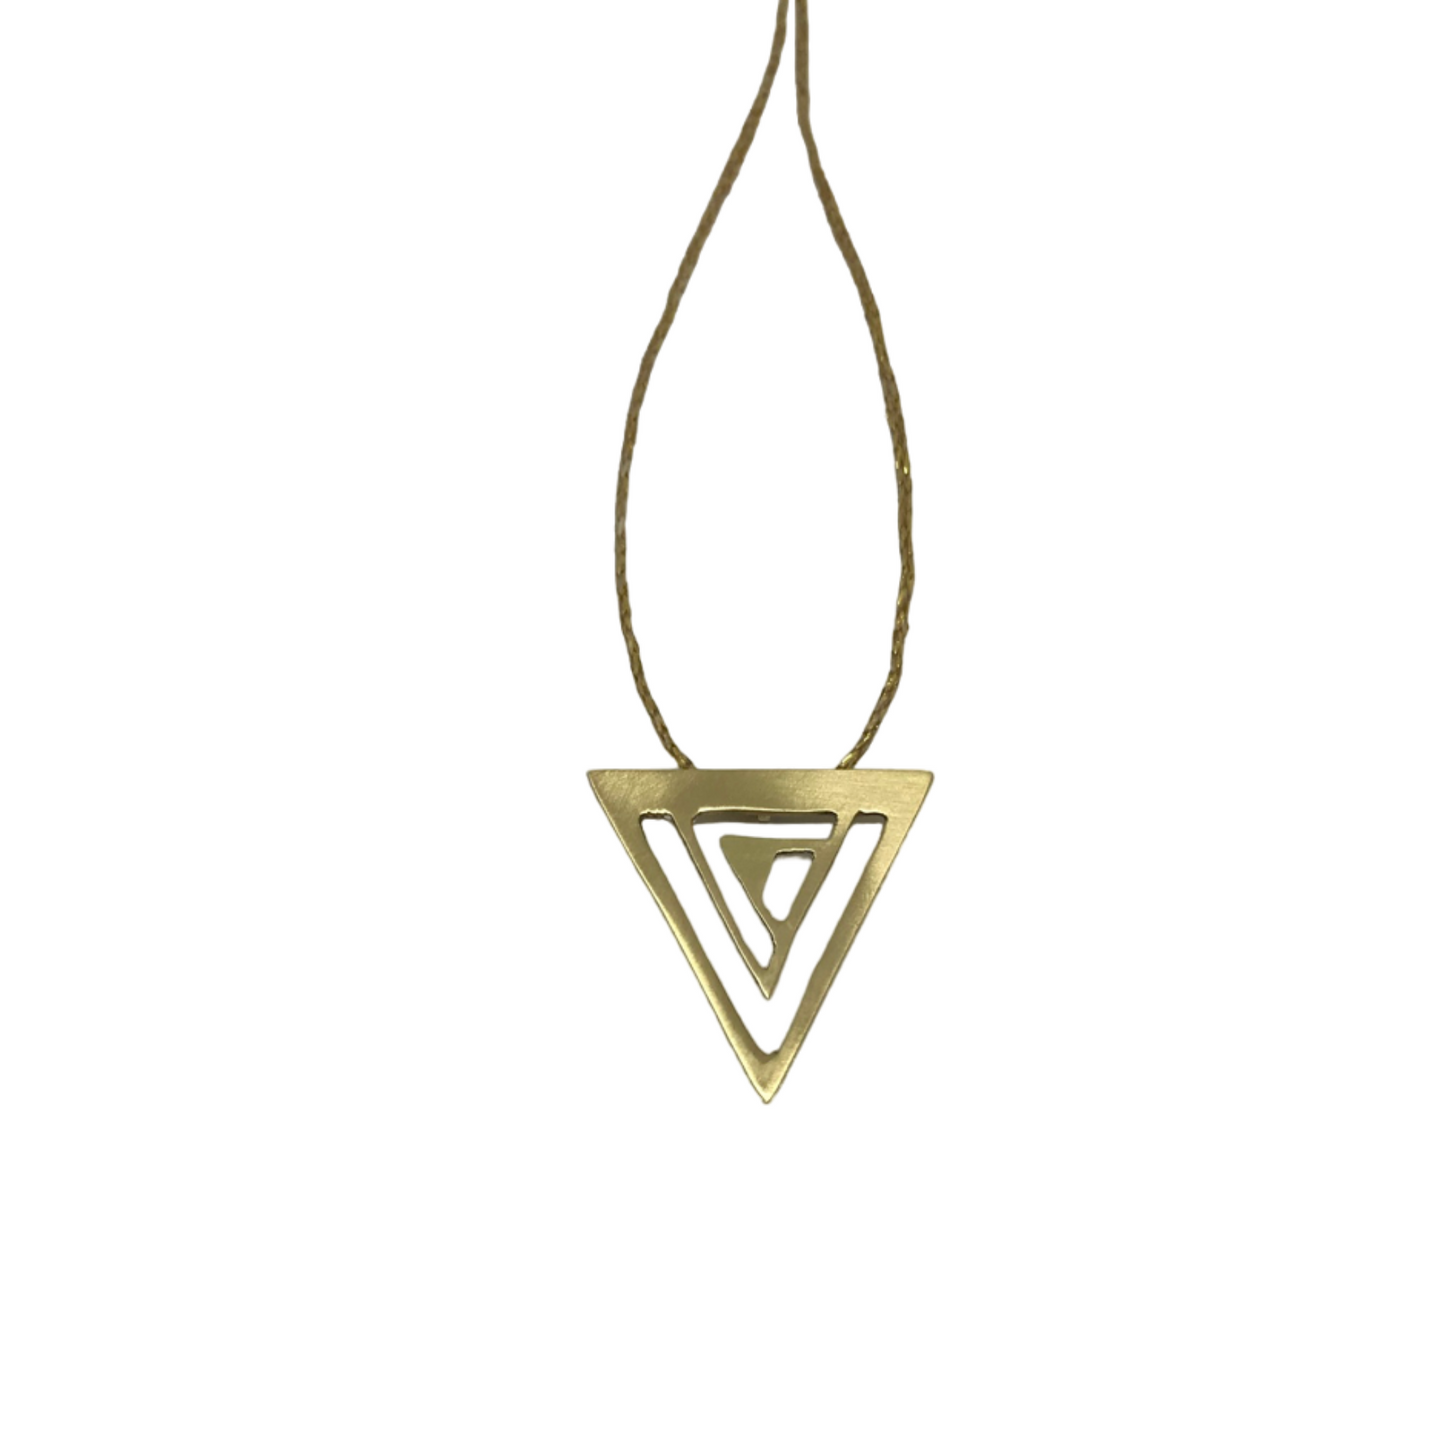 Yellow Pyramides Necklace